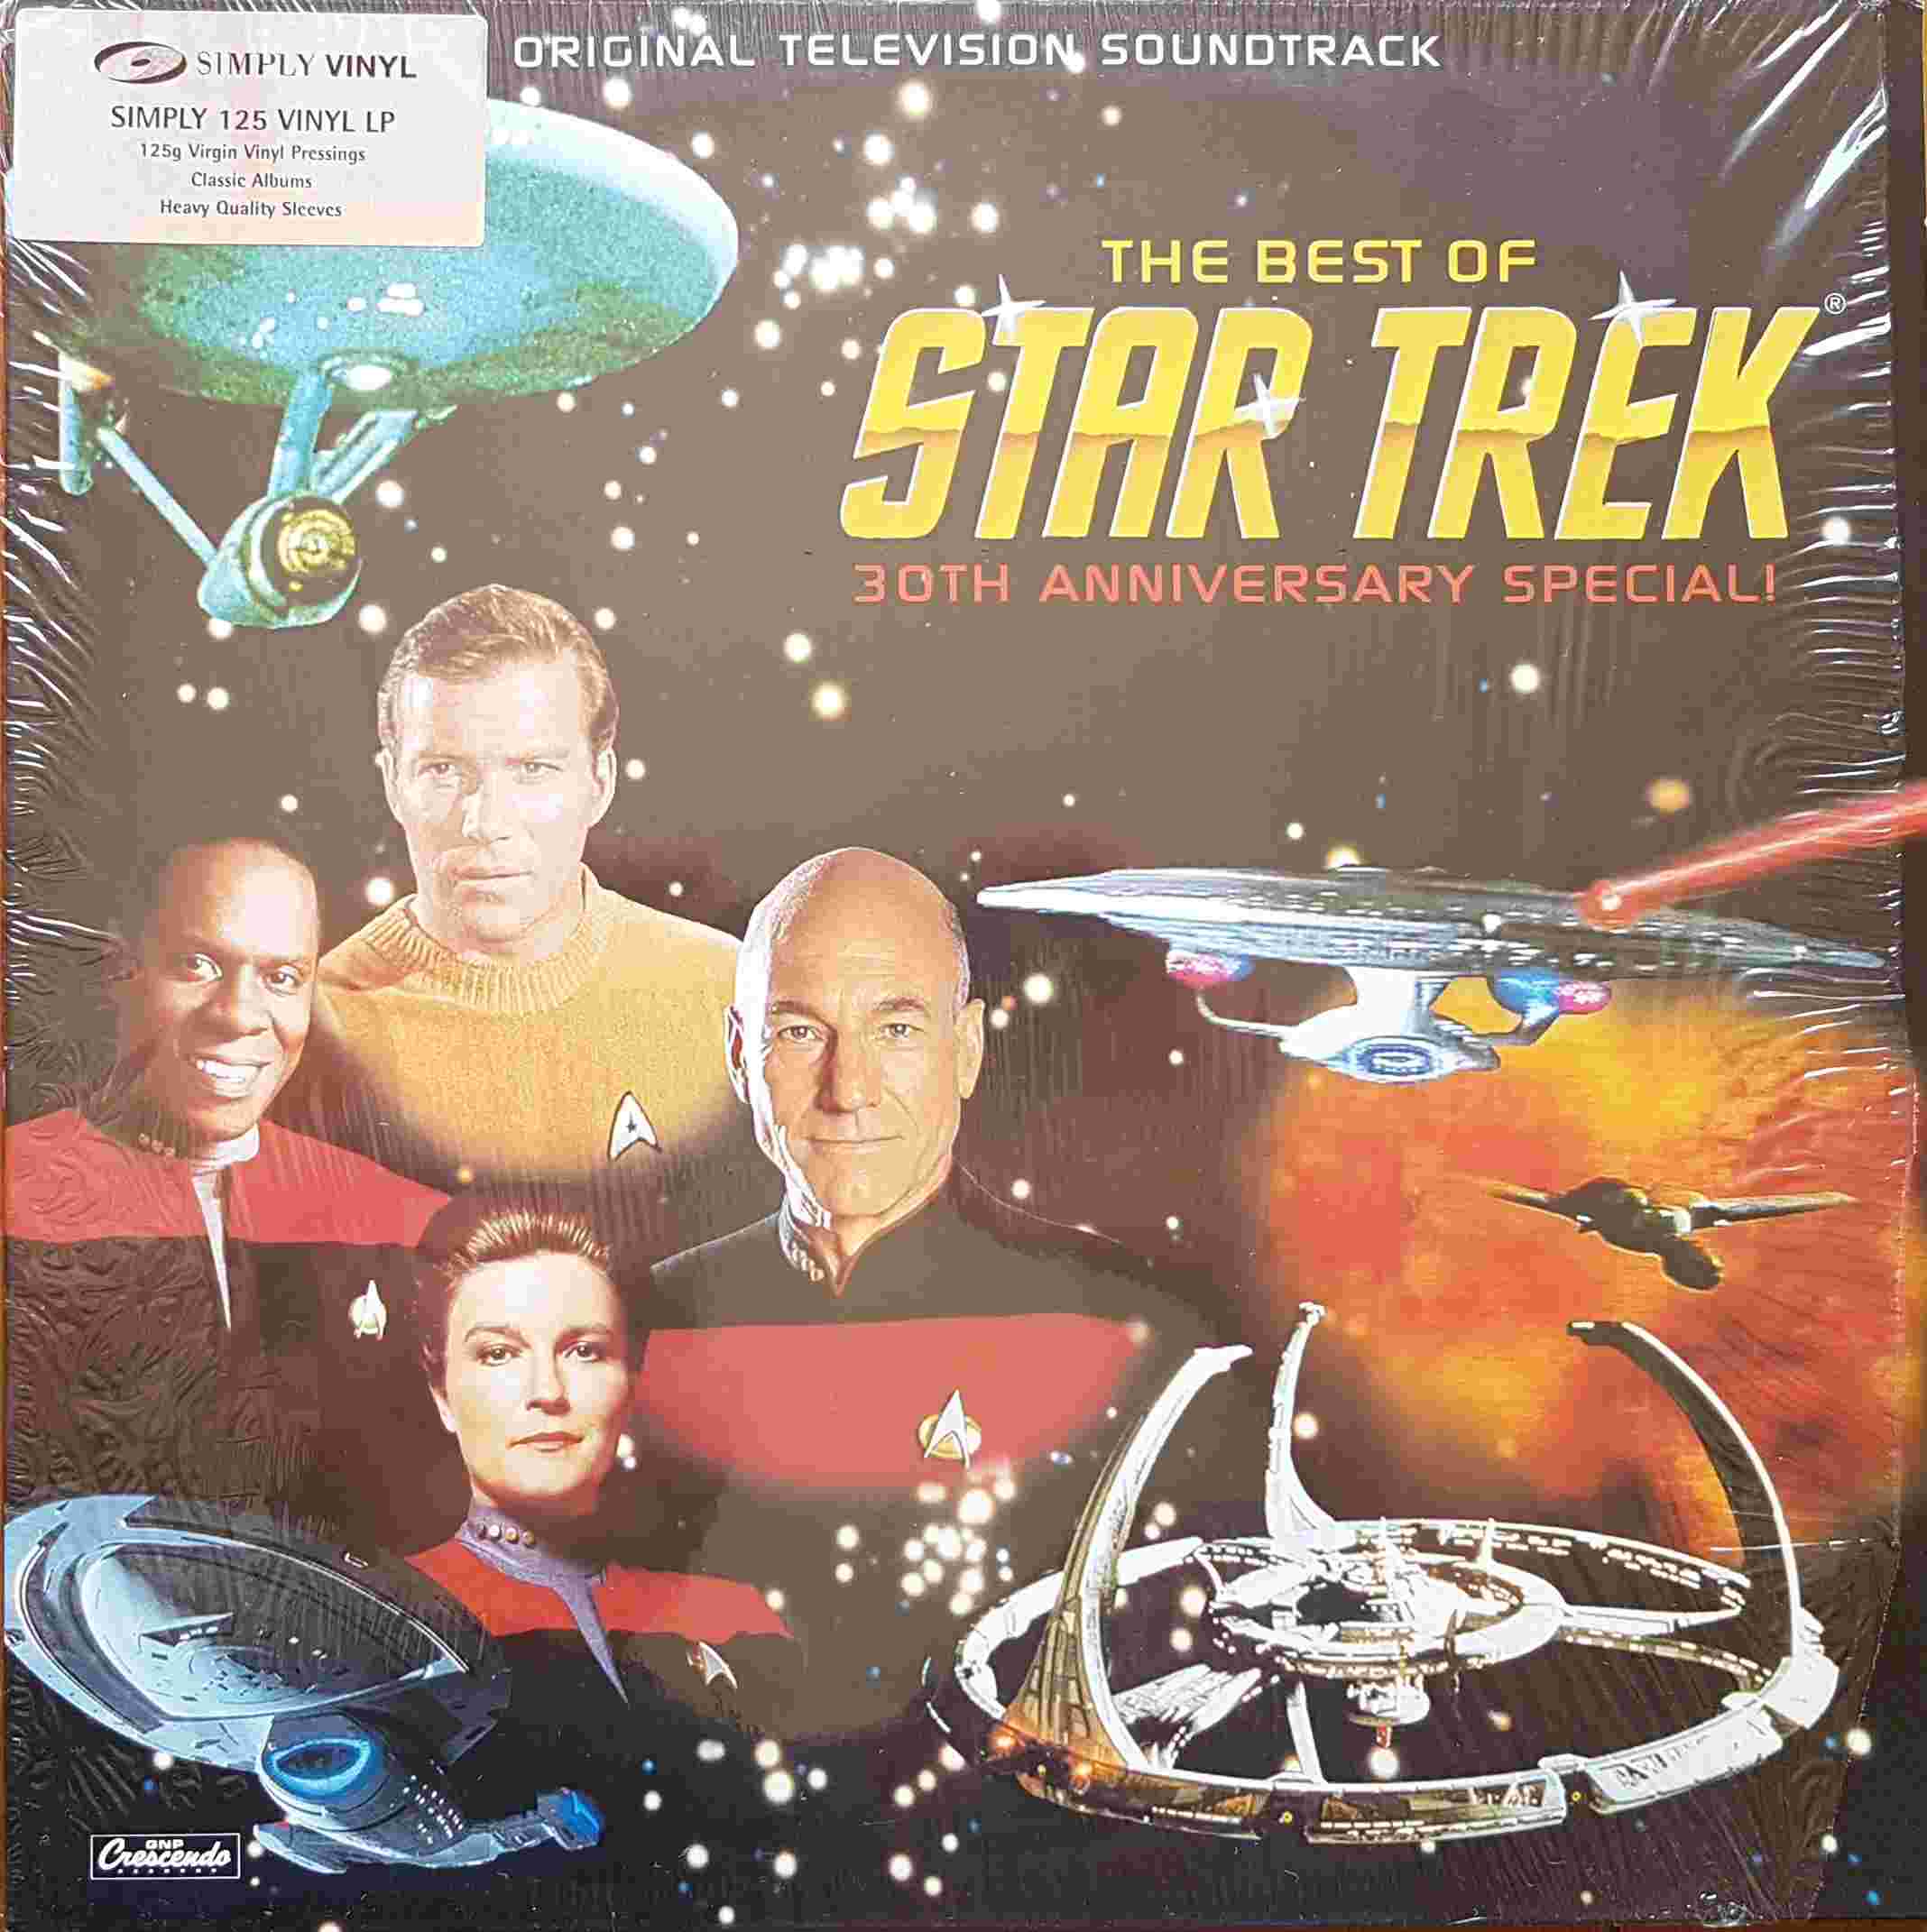 Picture of The best of Star Trek (30th anniversary special) by artist Alexander Courage / Jerry Fielding / Ron Jones / Jay Chattaway / Dennis McCarthy / Jerry Goldsmith from the BBC albums - Records and Tapes library